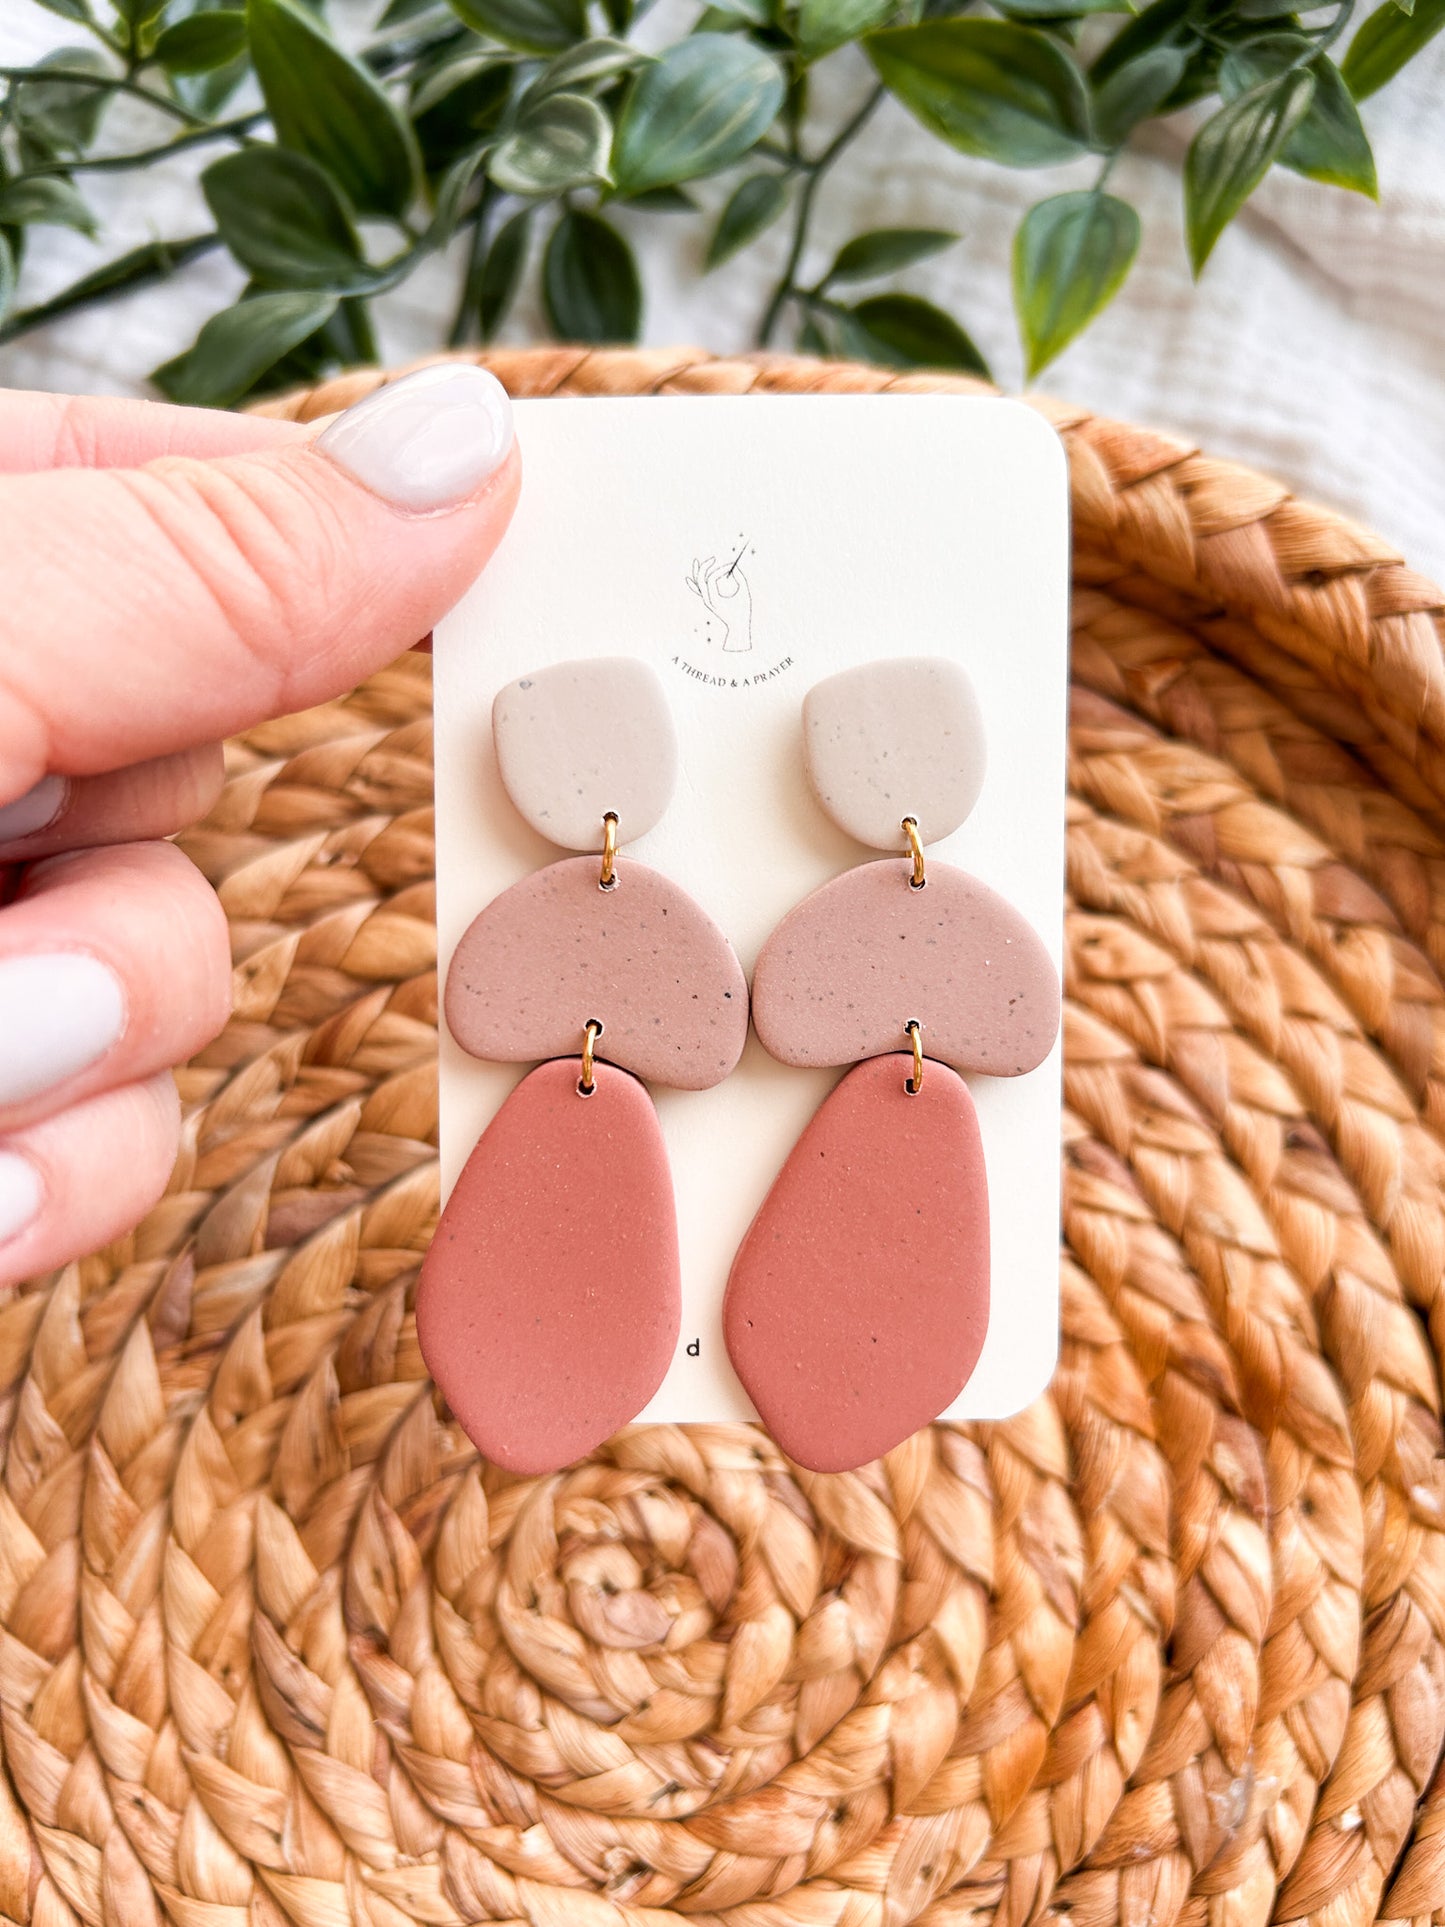 Soft Pink Romantic Dangle Polymer Clay Earrings | Spring Fashion | Spring Color Earrings | Statement Earrings | Lightweight